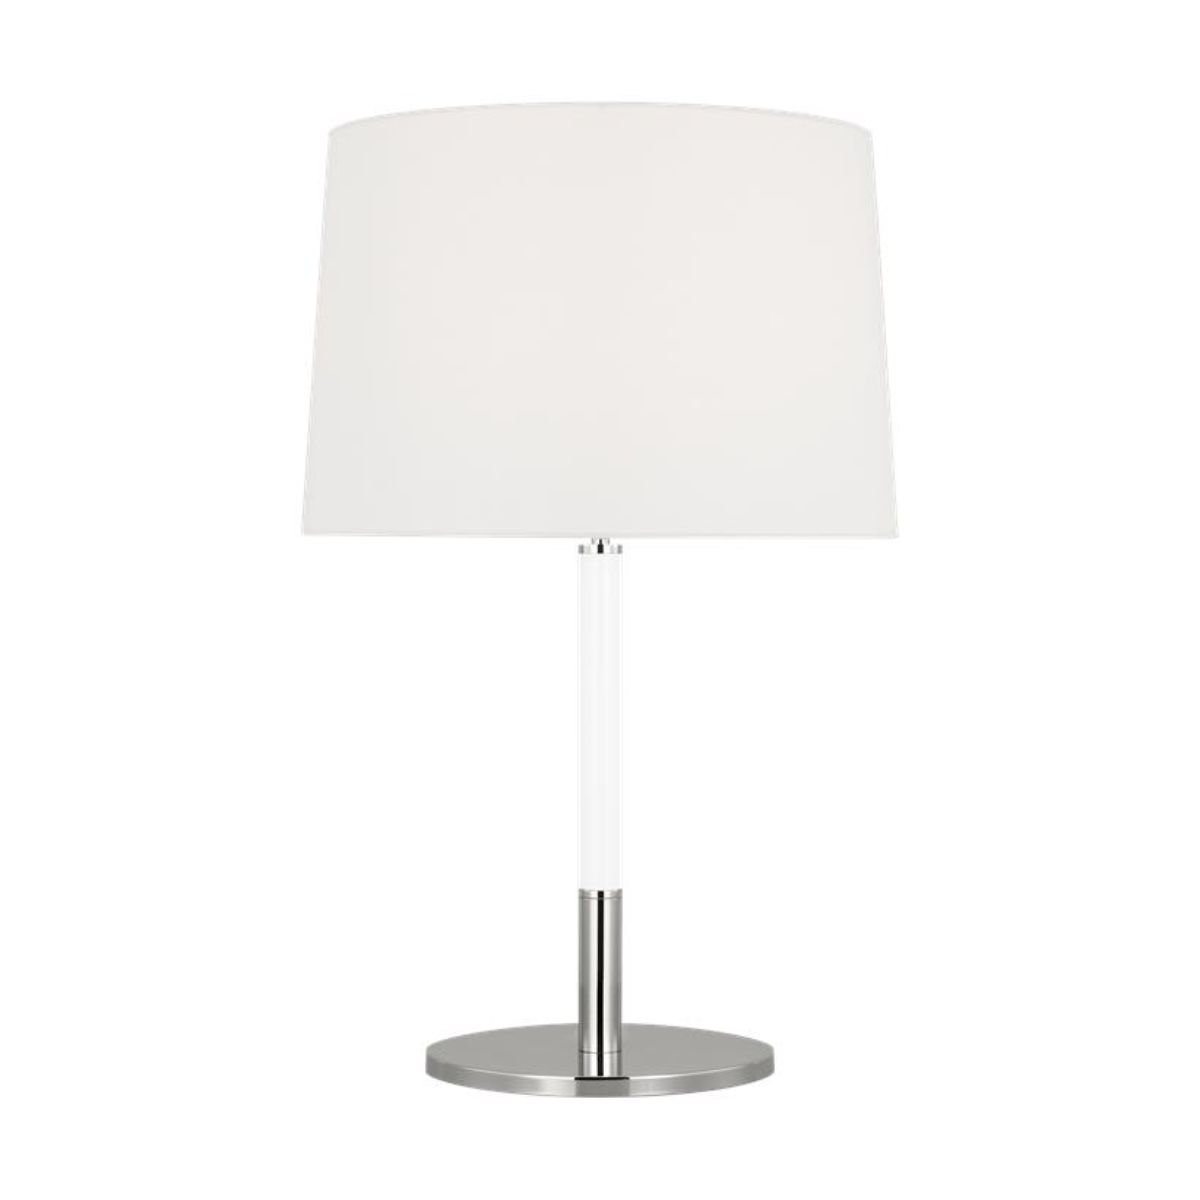 Monroe Medium Table Lamp Polished Nickel with White Accents